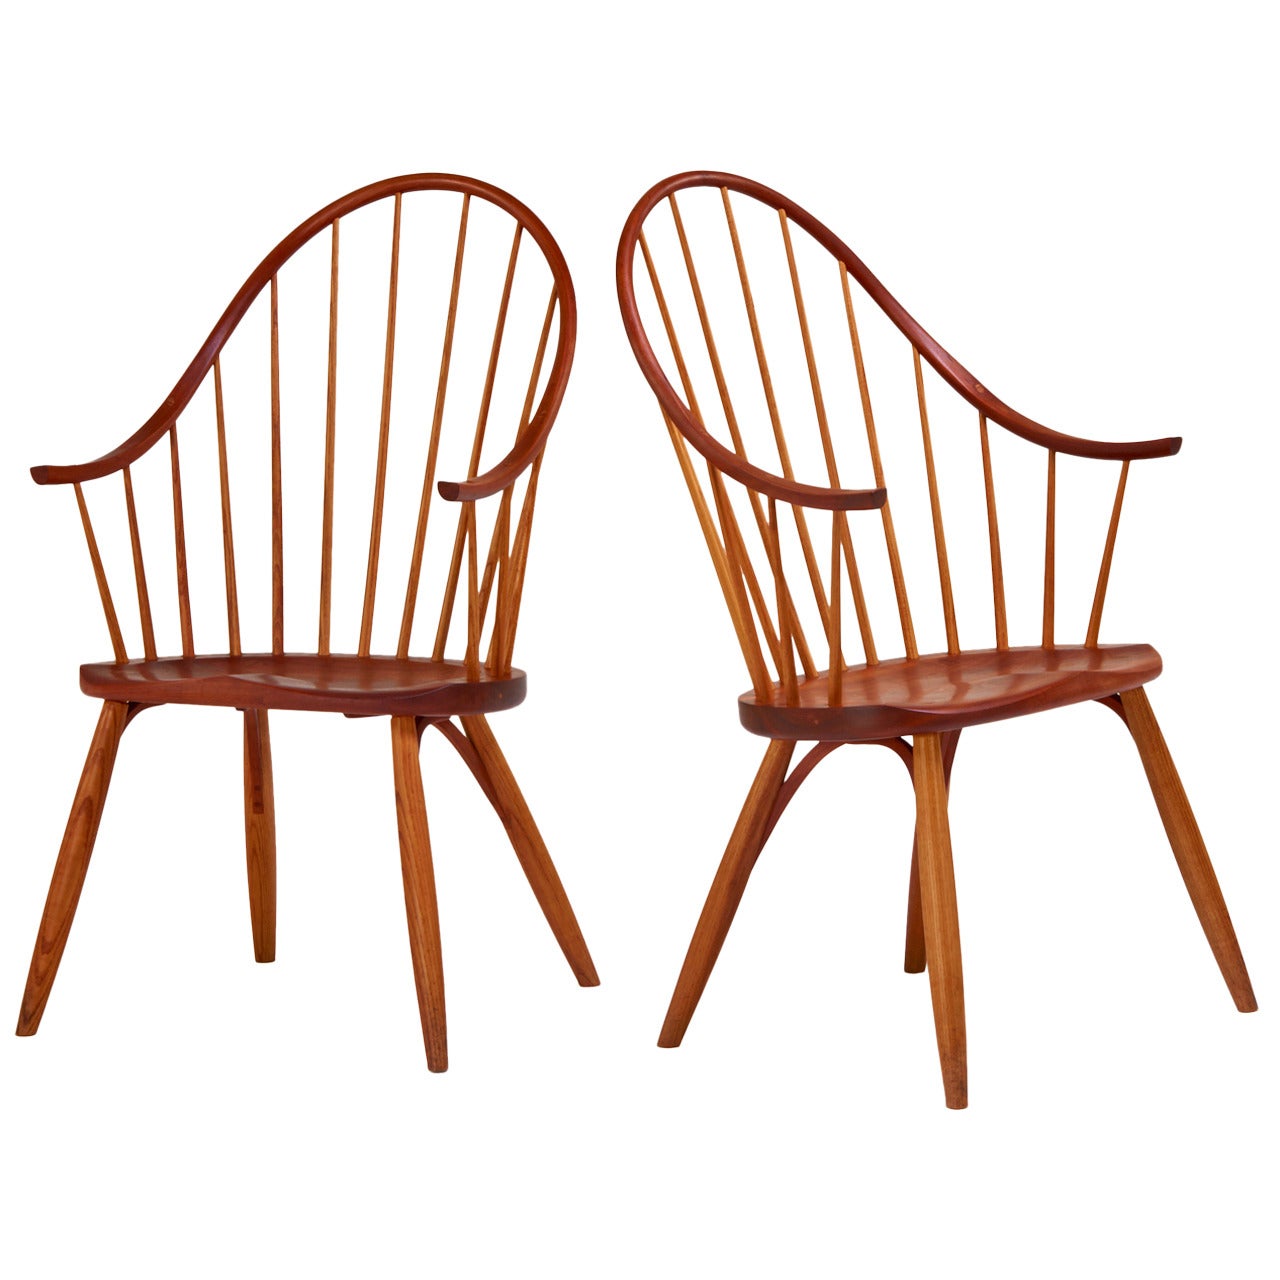 Pair of Early "Continuous Armchairs" by Thomas Moser